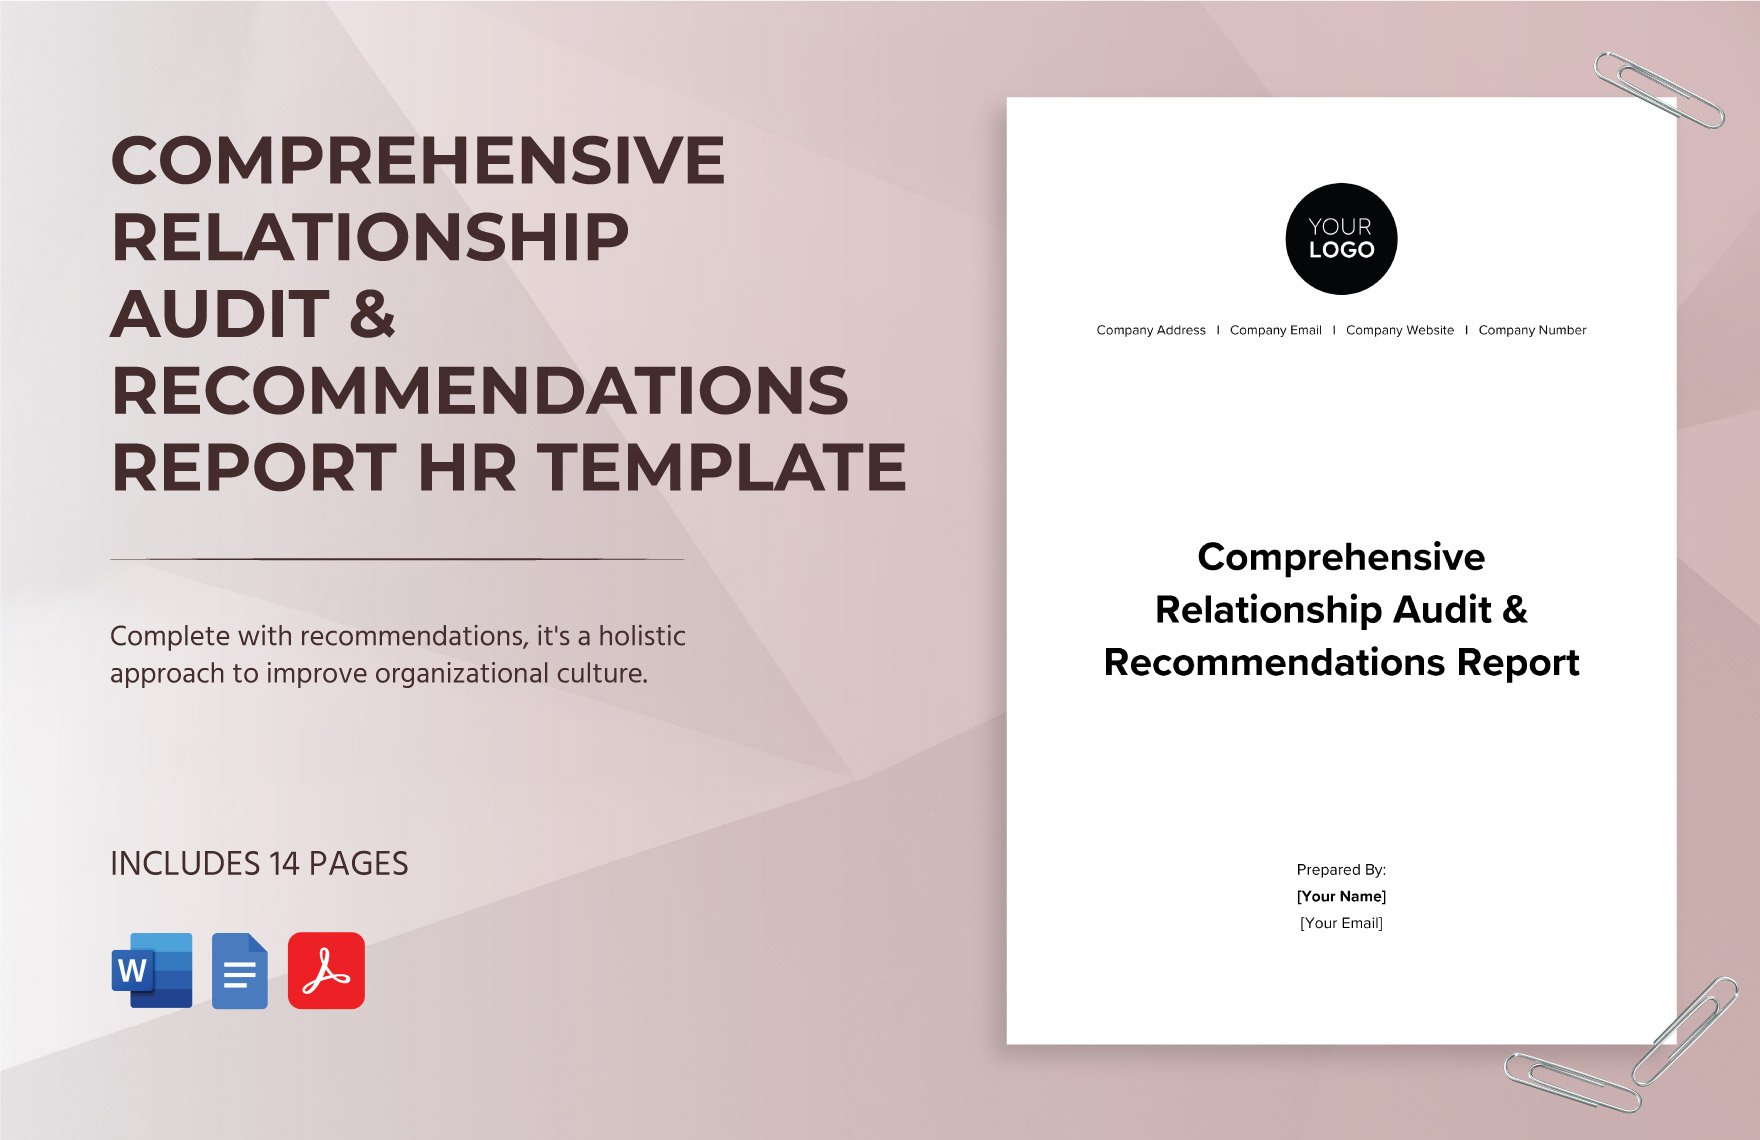 Comprehensive Relationship Audit & Recommendations Report HR Template